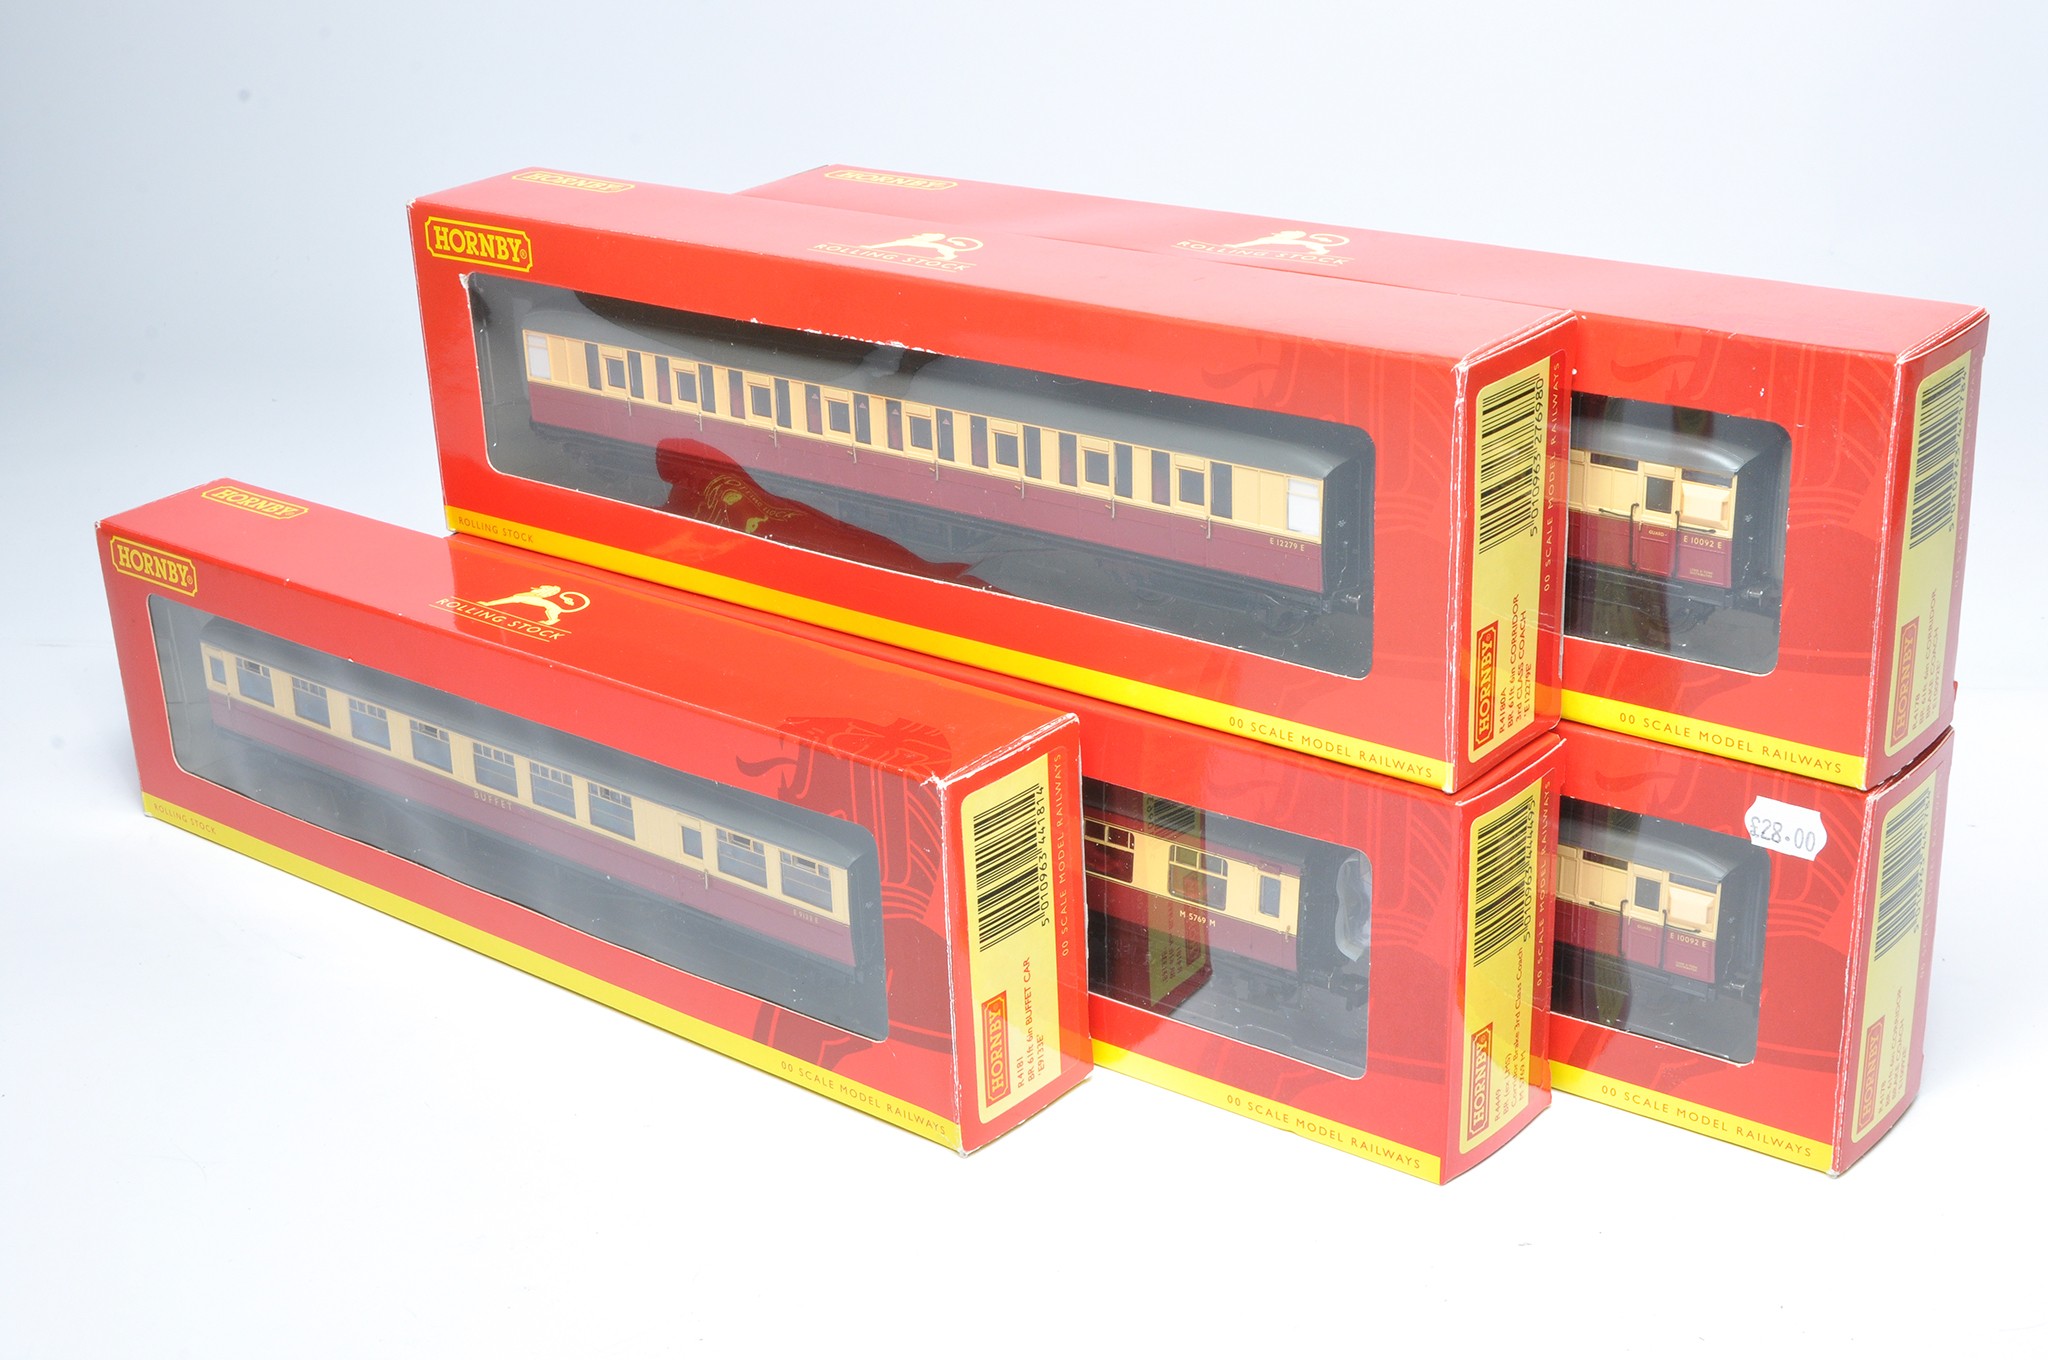 Hornby Model Railway comprising five coaches in Crimson Cream. All look to be without fault in boxes